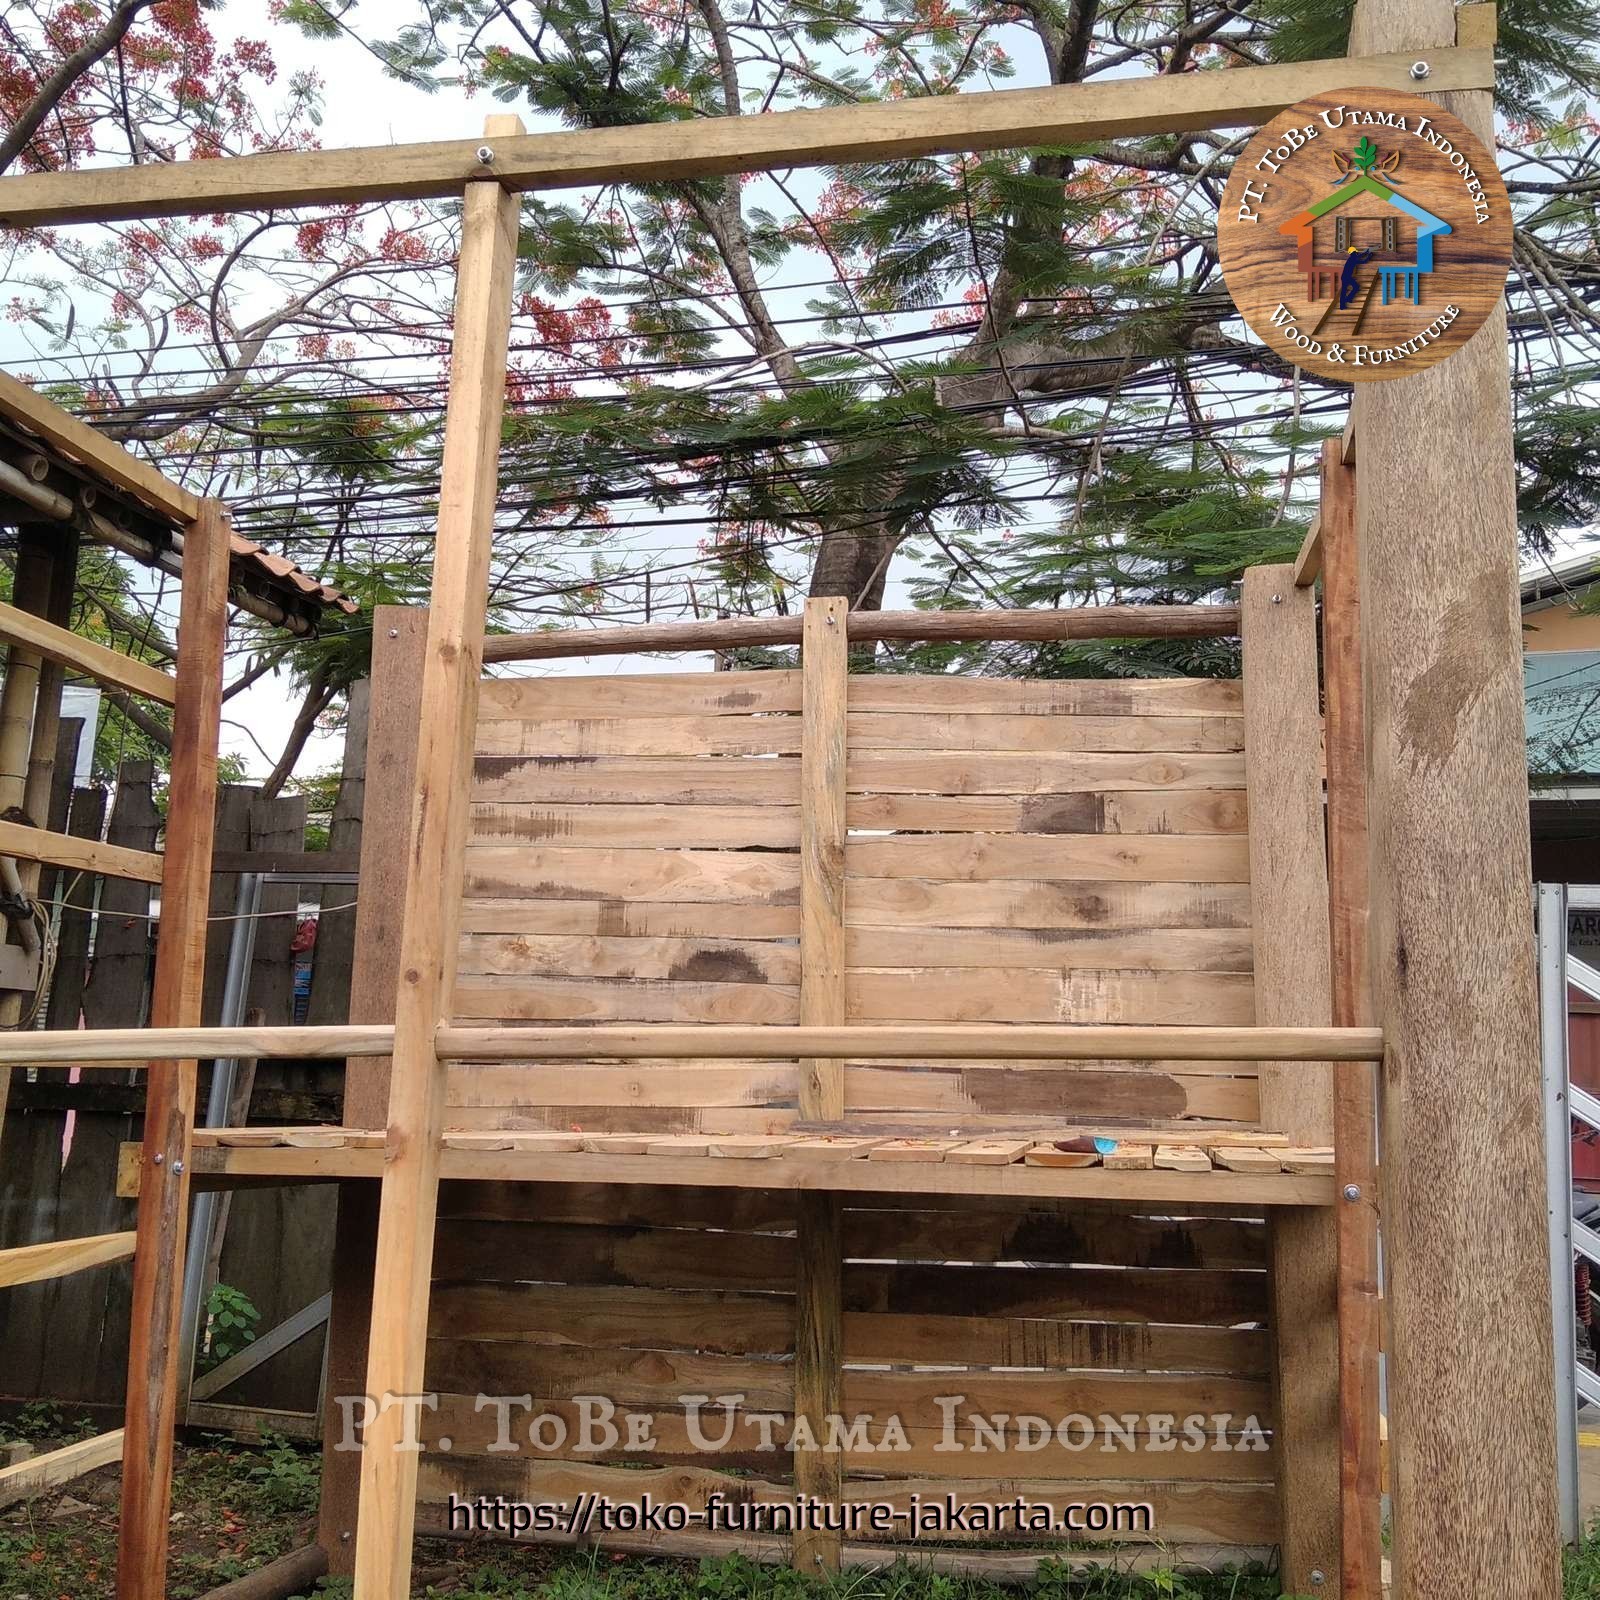 Kids: Wooden Playground for Kids made of teakwood, coconut wood (image 1 of 9).